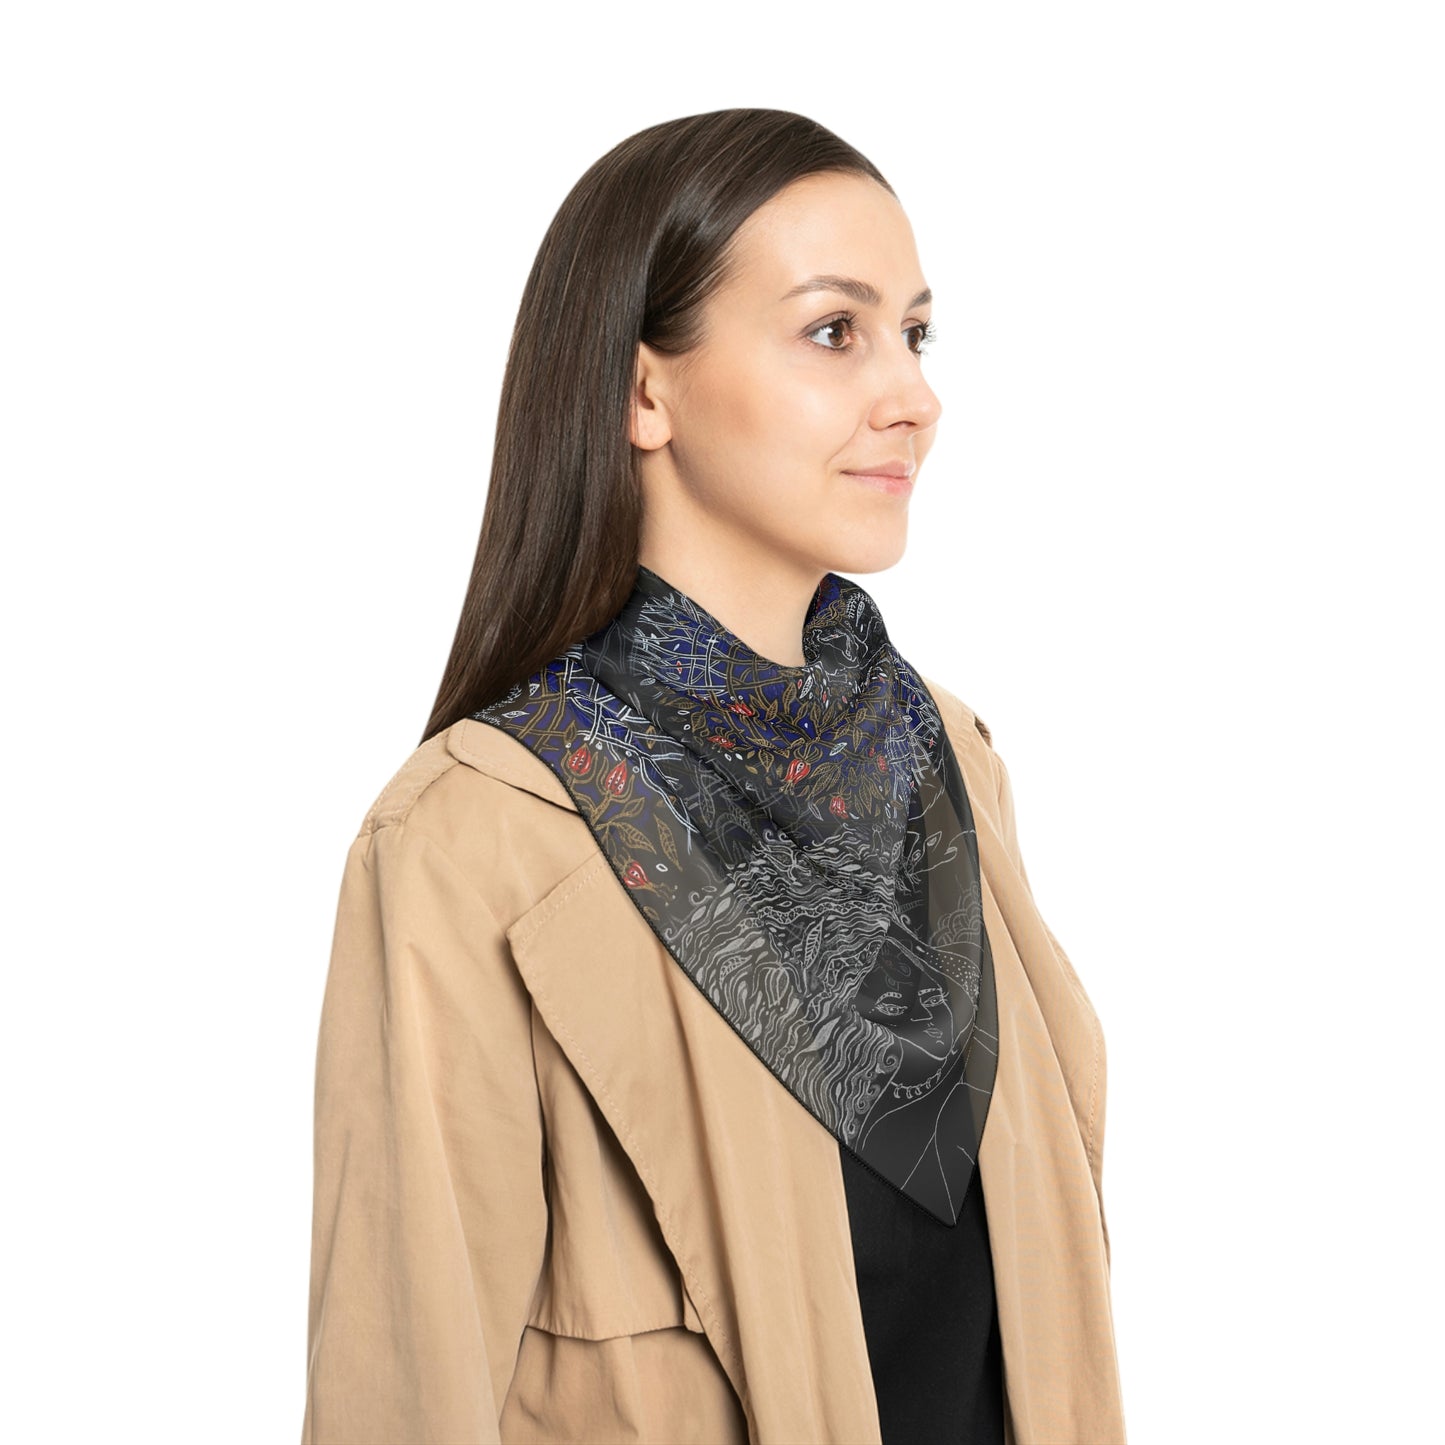 Chinese Years Zodiac Sign Poly Scarf (Rat)